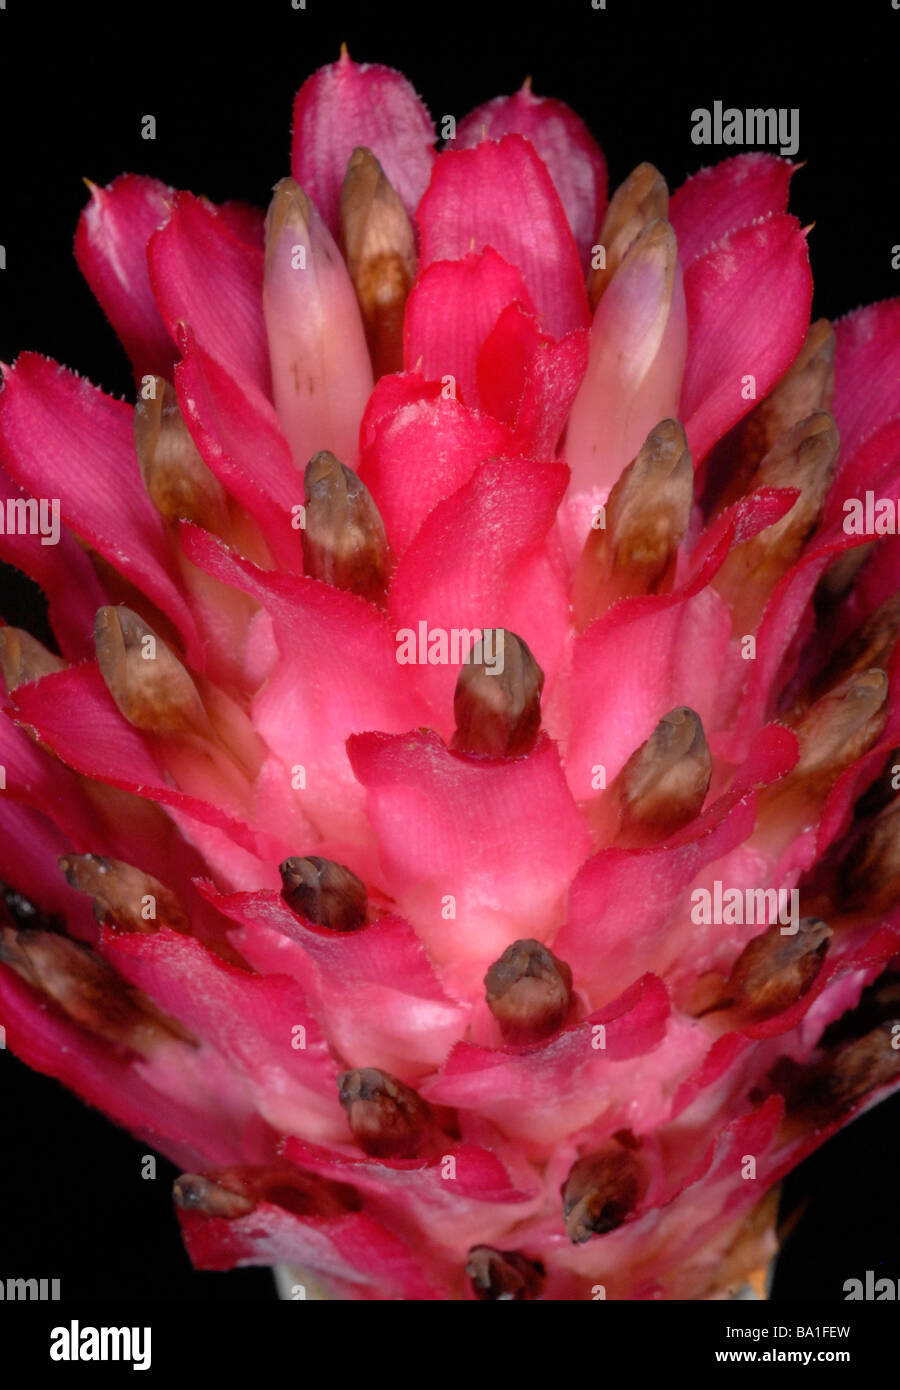 Quesnelia testudo.  Quesnelia  is a genus in the family Bromeliaceae, subfamily Bromelioideae. Indigenous to eastern Brazil Stock Photo